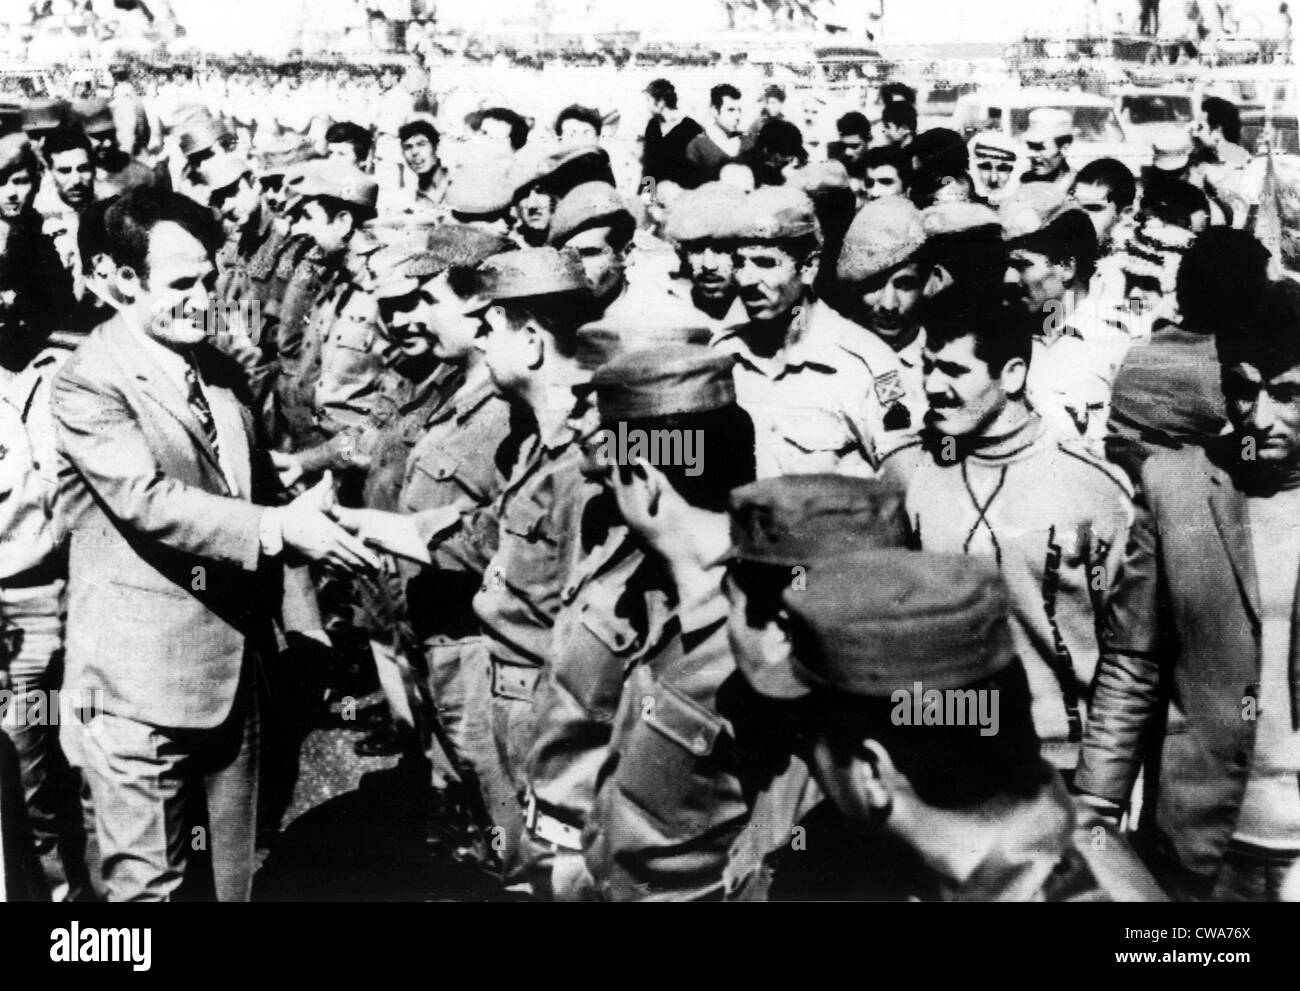 10/19/71--DERAA, SYRIA: Syrian President Hafez Assad (left) shakes hands with Syrian troops near the Syrian-Israeli border. In Stock Photo